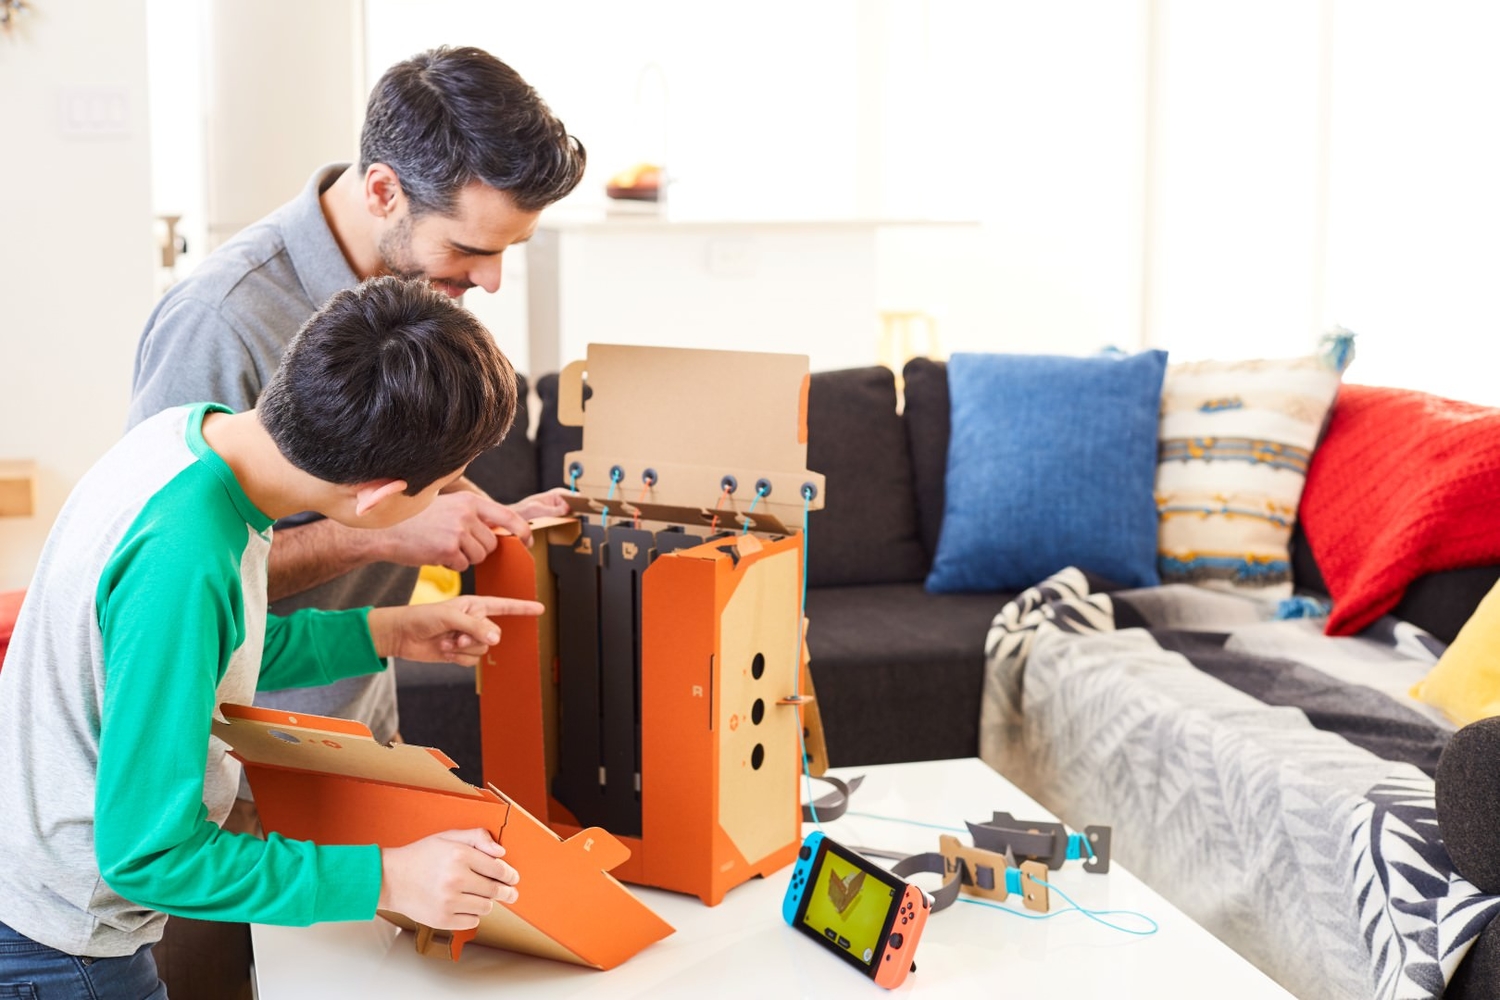 Nintendo Labo gives you new ways to play